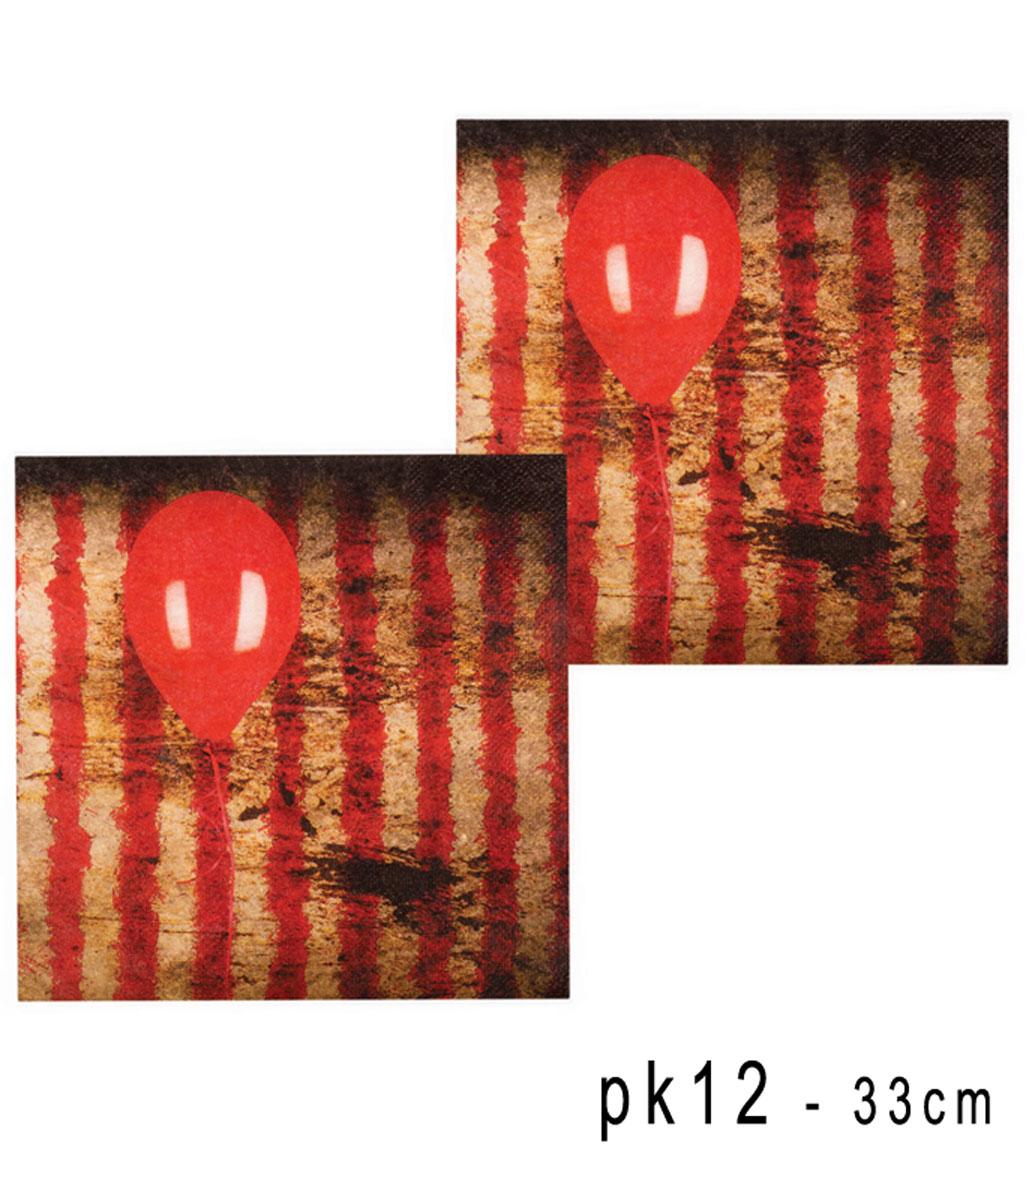 Pk 12 Horror Circus Paper Napkins 33cm by Boland 72353 available here at Karnival Costumes online Halloween party shop